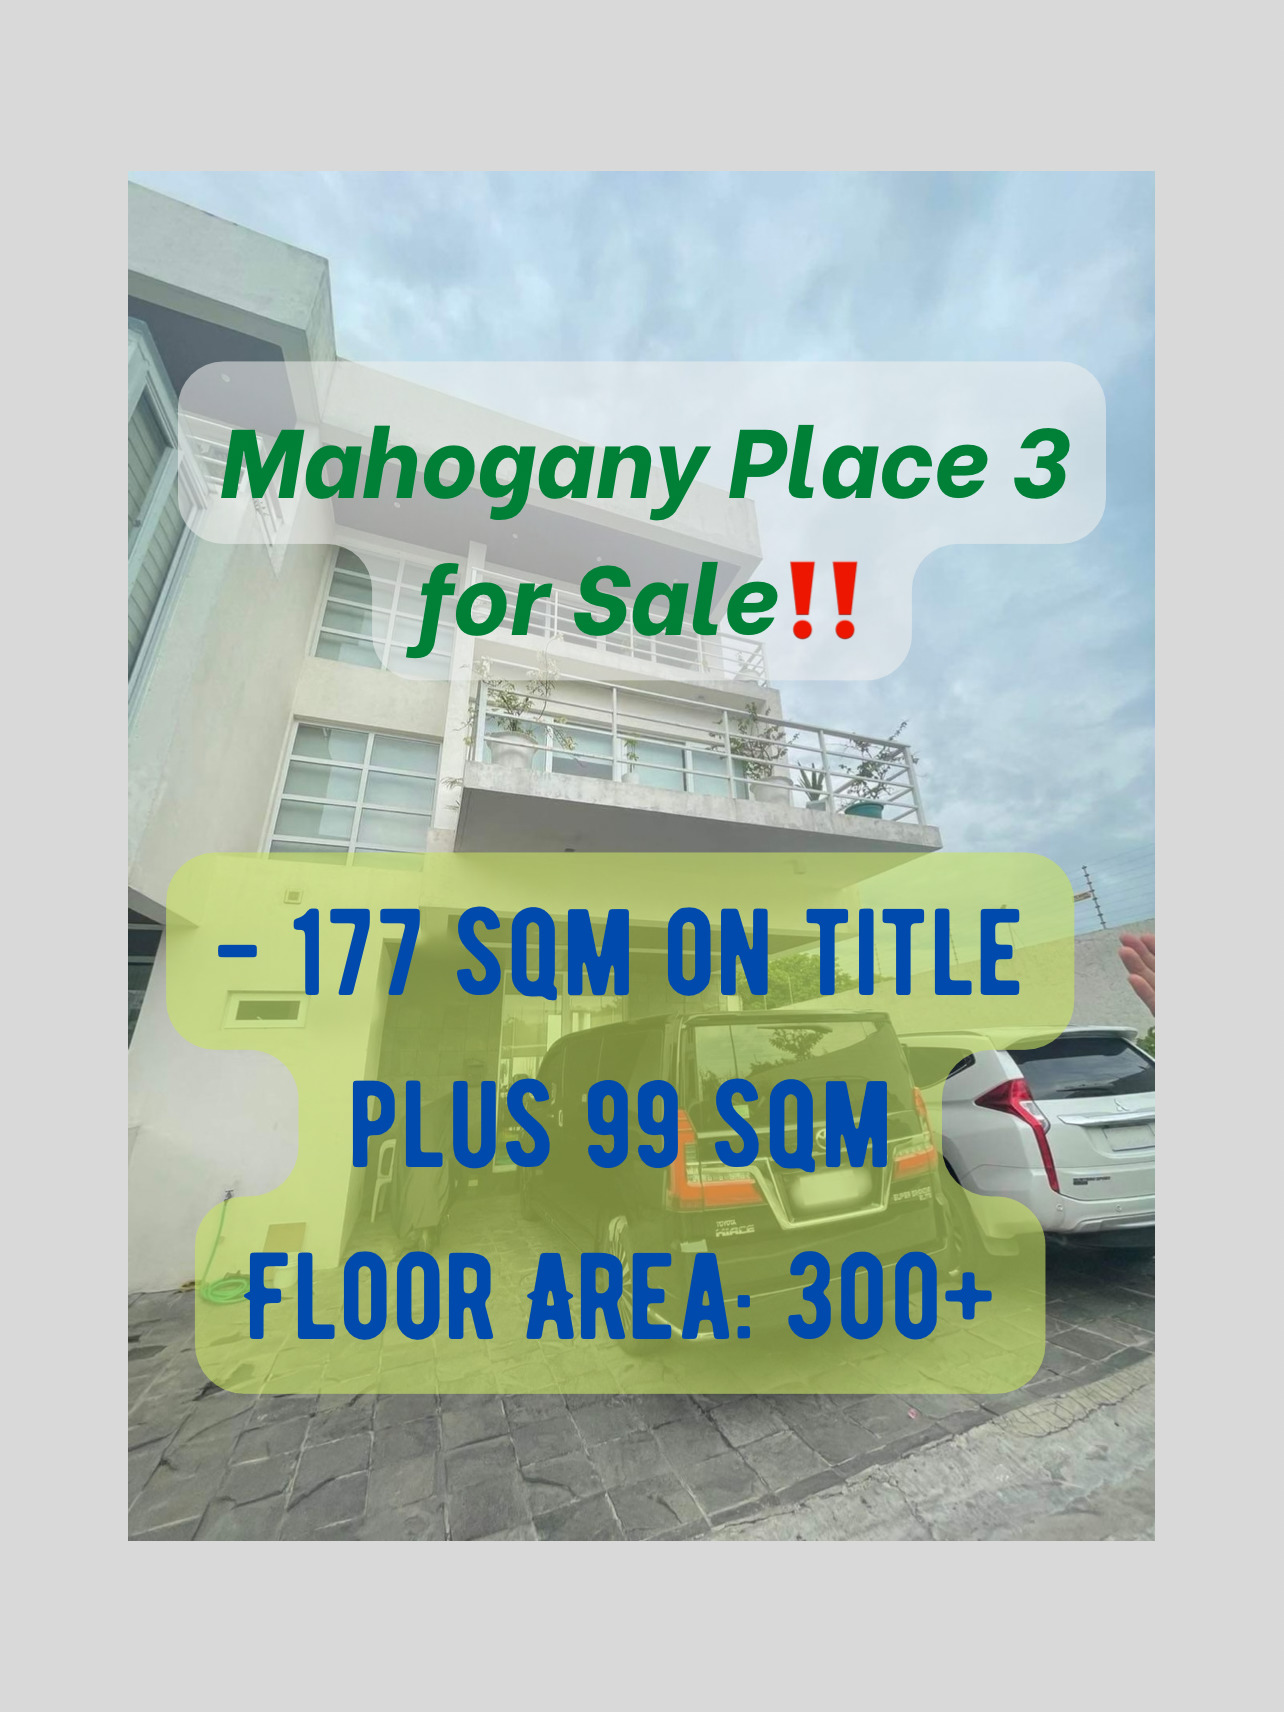 Mahogany Place 3 for Sale‼️